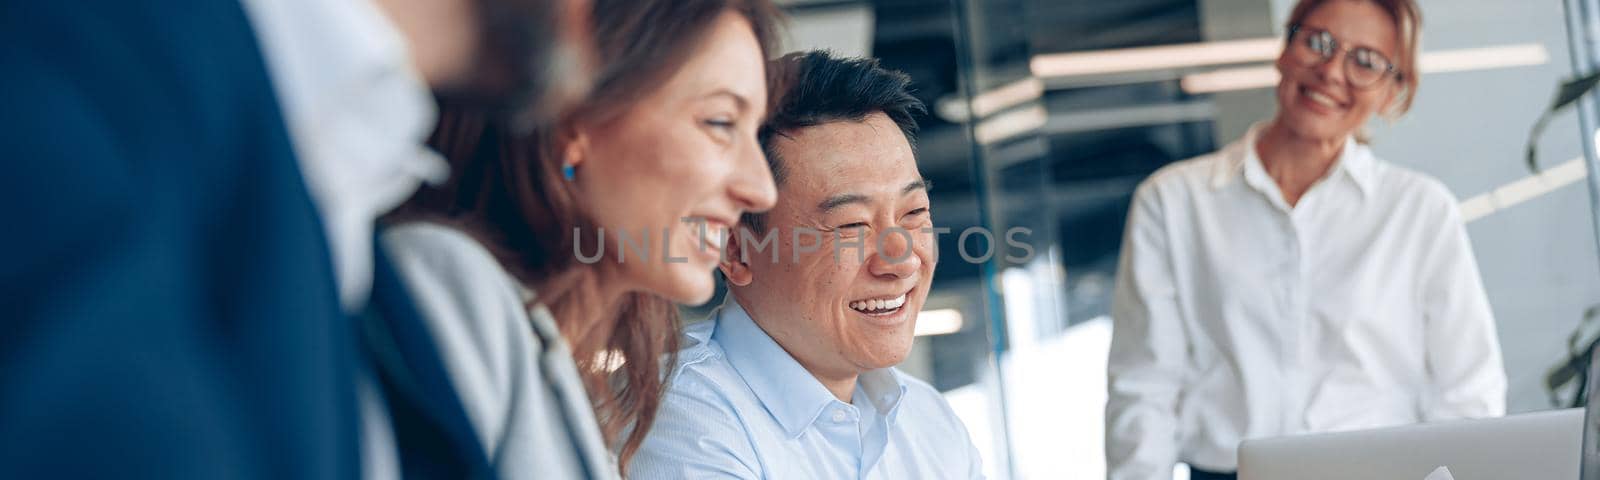 Close up of smiling confident businesswoman on business meeting with colleagues in office by Yaroslav_astakhov